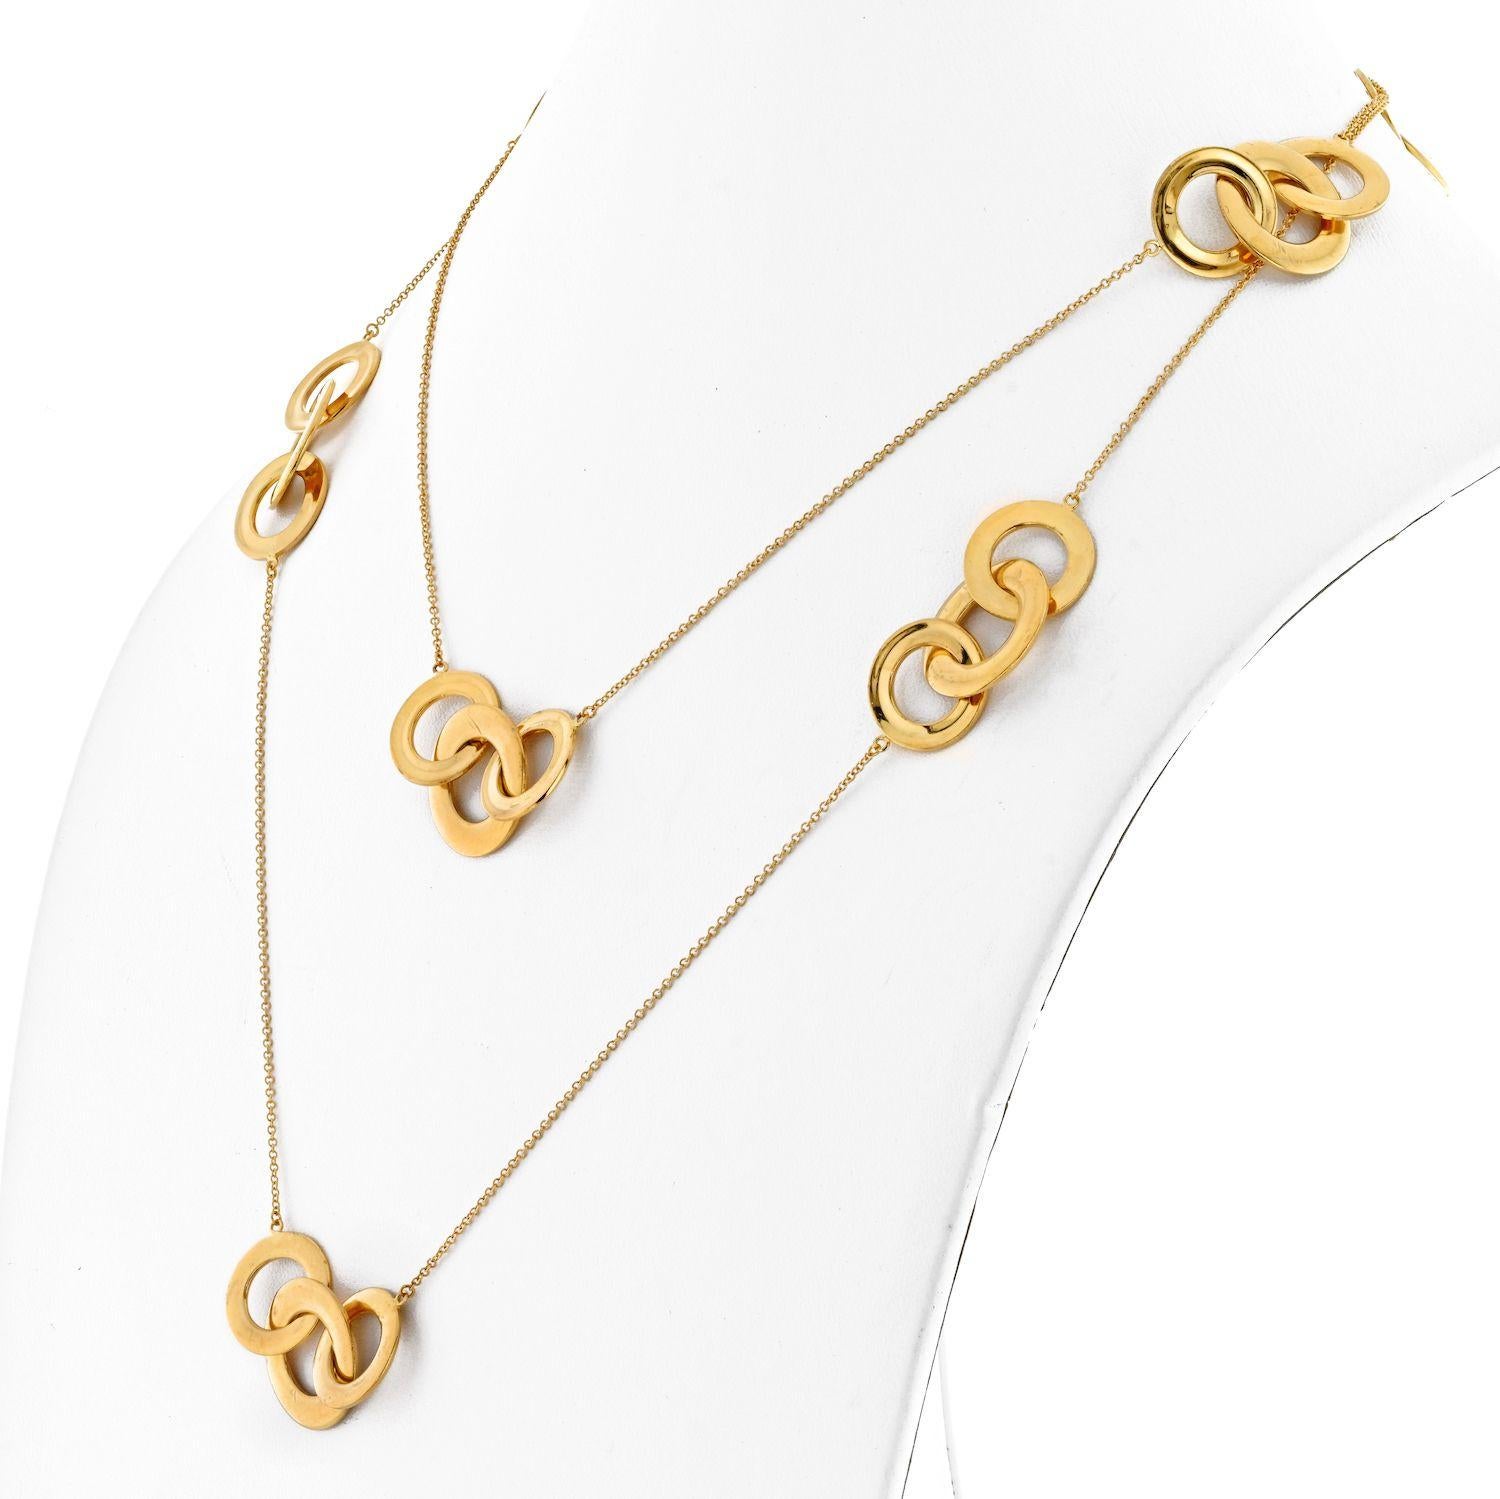 Tiffany & Co. 18K Yellow Gold 28 inches Chain Necklace.
Celebrating its 175th anniversary, Tiffany commemorates its defined style and longevity with these interlocking rings signifying those special moments in a couples life.
Designed in sparkling